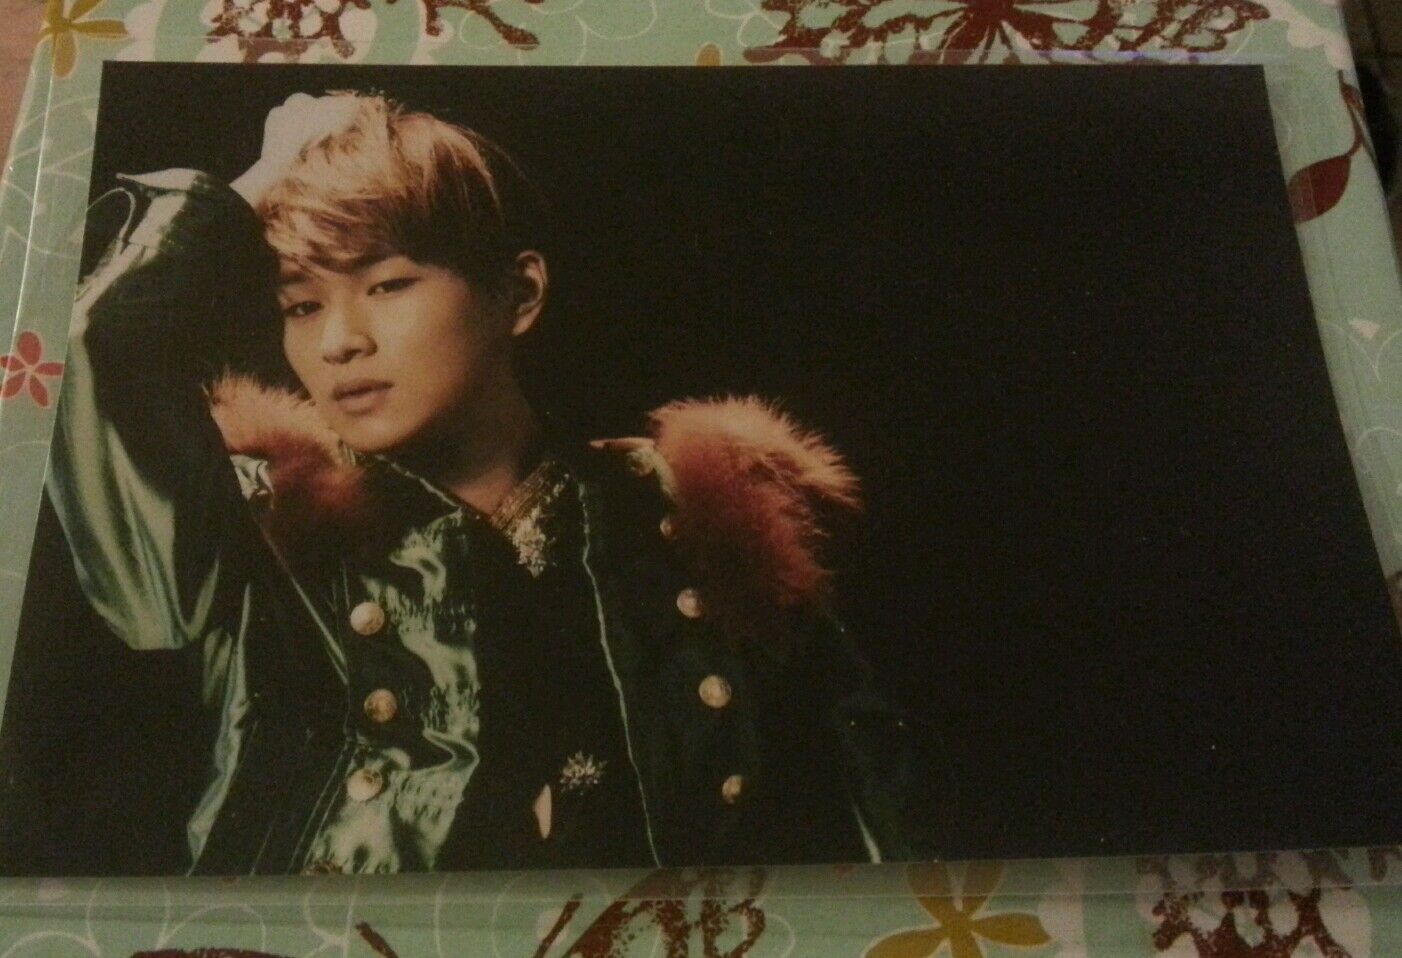 Shinee onew dream girl OFFICIAL Photo Kpop K-pop  shipped in toploader (U.S SELL